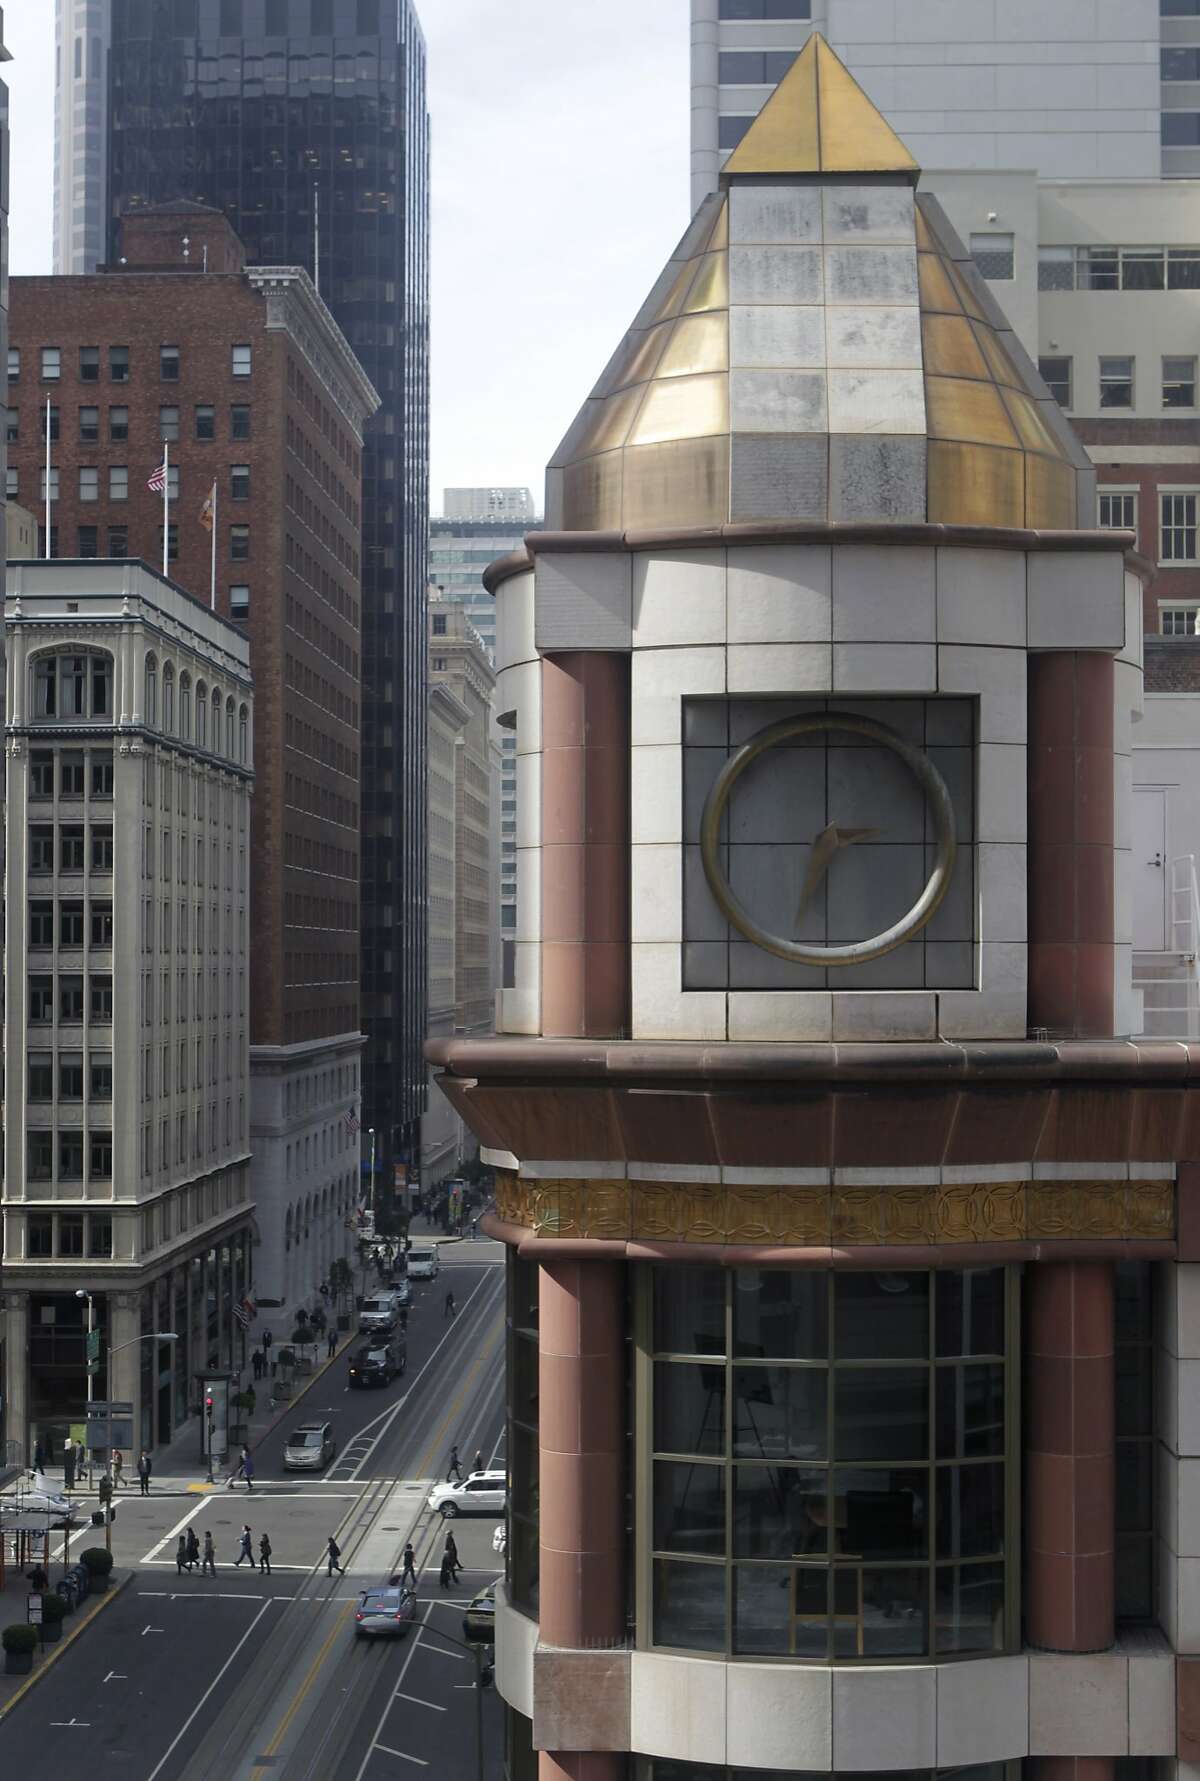 A clock tower is seen on the 200 California Street office building in San Francisco, Calif. on Wednesday, Feb. 12, 2014. Building owners have received approval to lop off the clock tower and remove gold-leaf trim from the top of the structure.